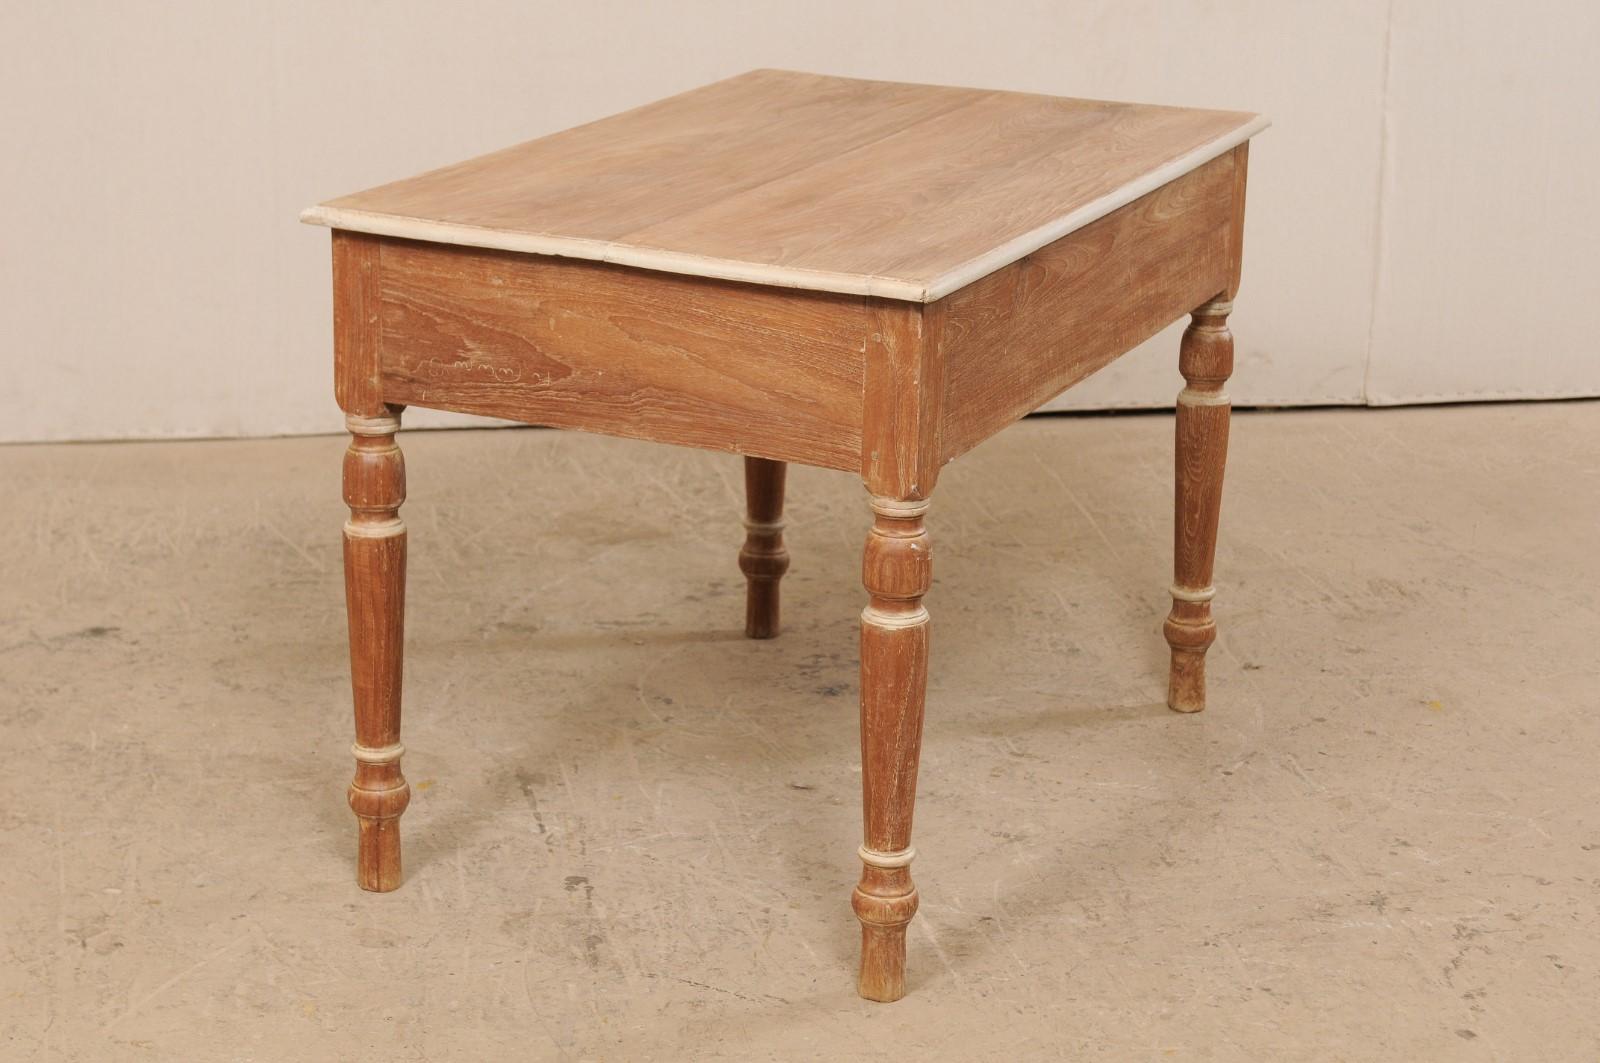 Teak Early 20th Century British Colonial Occasional Table with Drawers